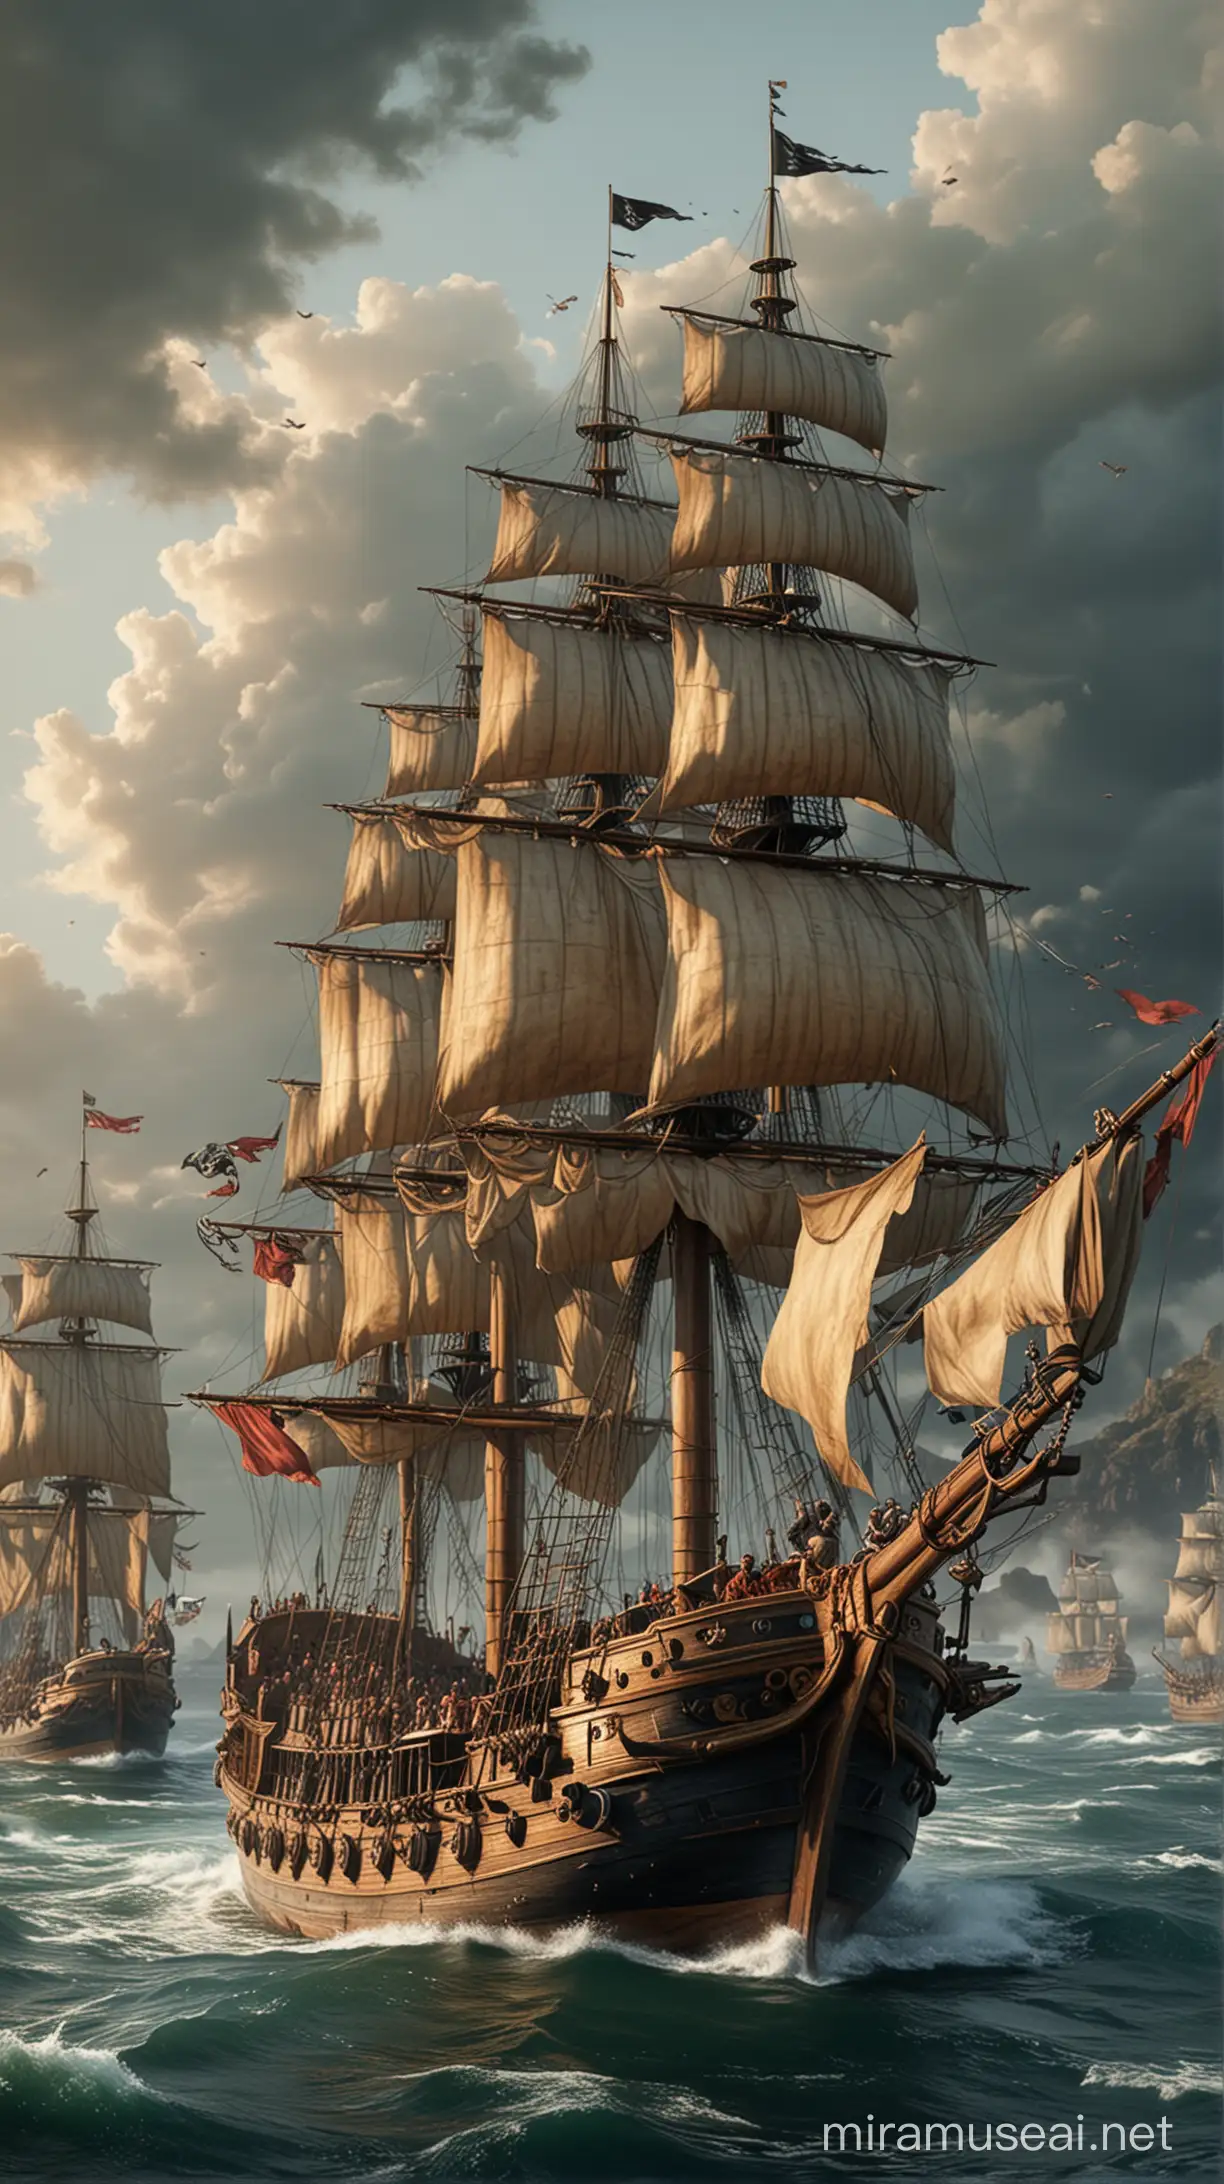 Images of Caesar's ransom being paid and his subsequent return with a fleet of ships to confront the pirates. hyper realistic